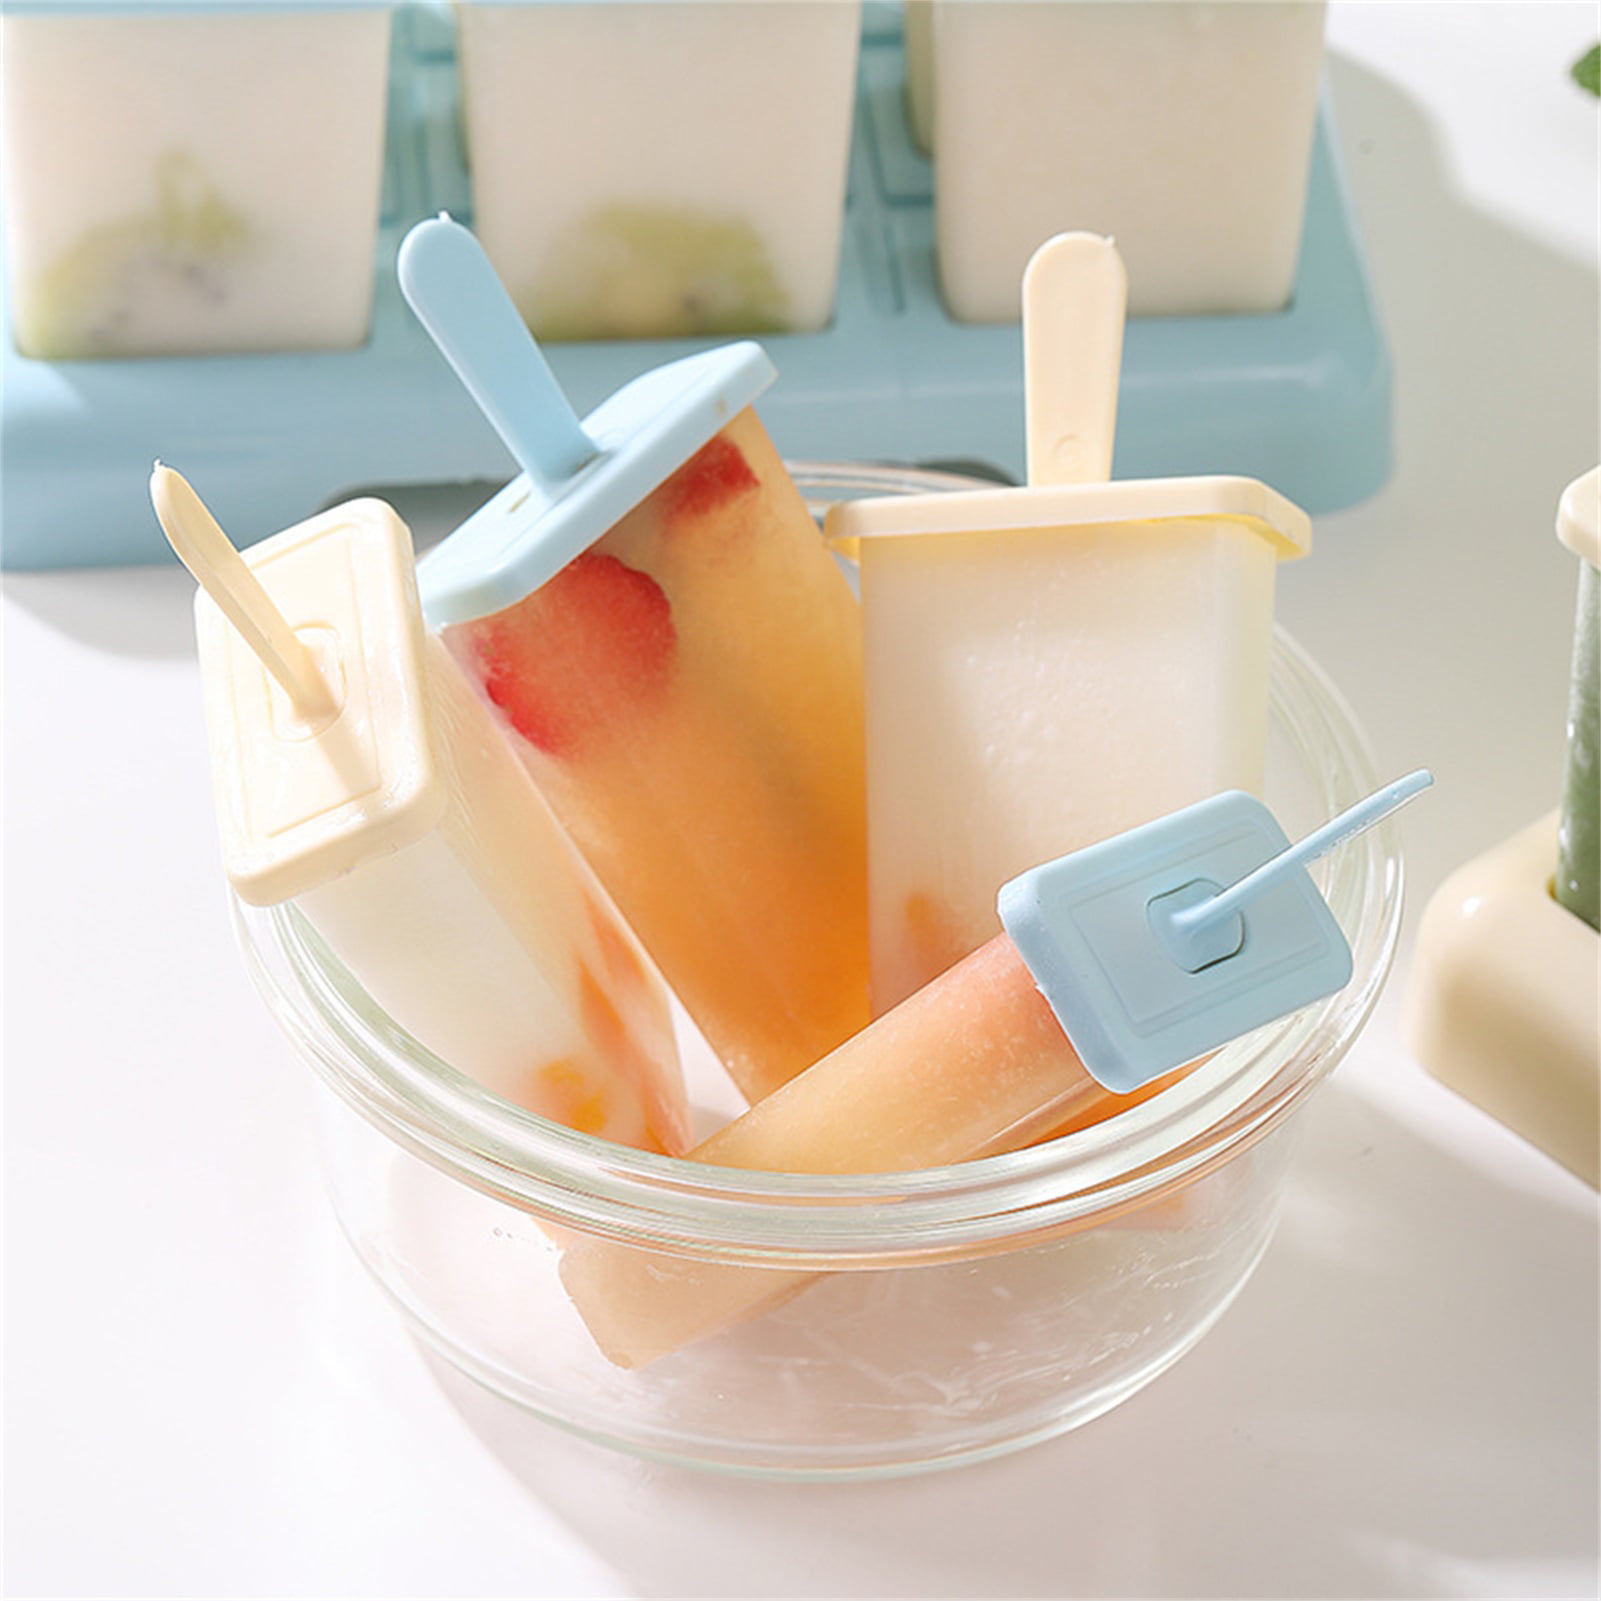 Leaqu Popsicle Molds 90 Pieces Silicone Ice Pop Molds BPA Free Popsicle Mold Reusable Easy Release Ice Pop Maker Ice Cream Mold Food Grade Non-Stick